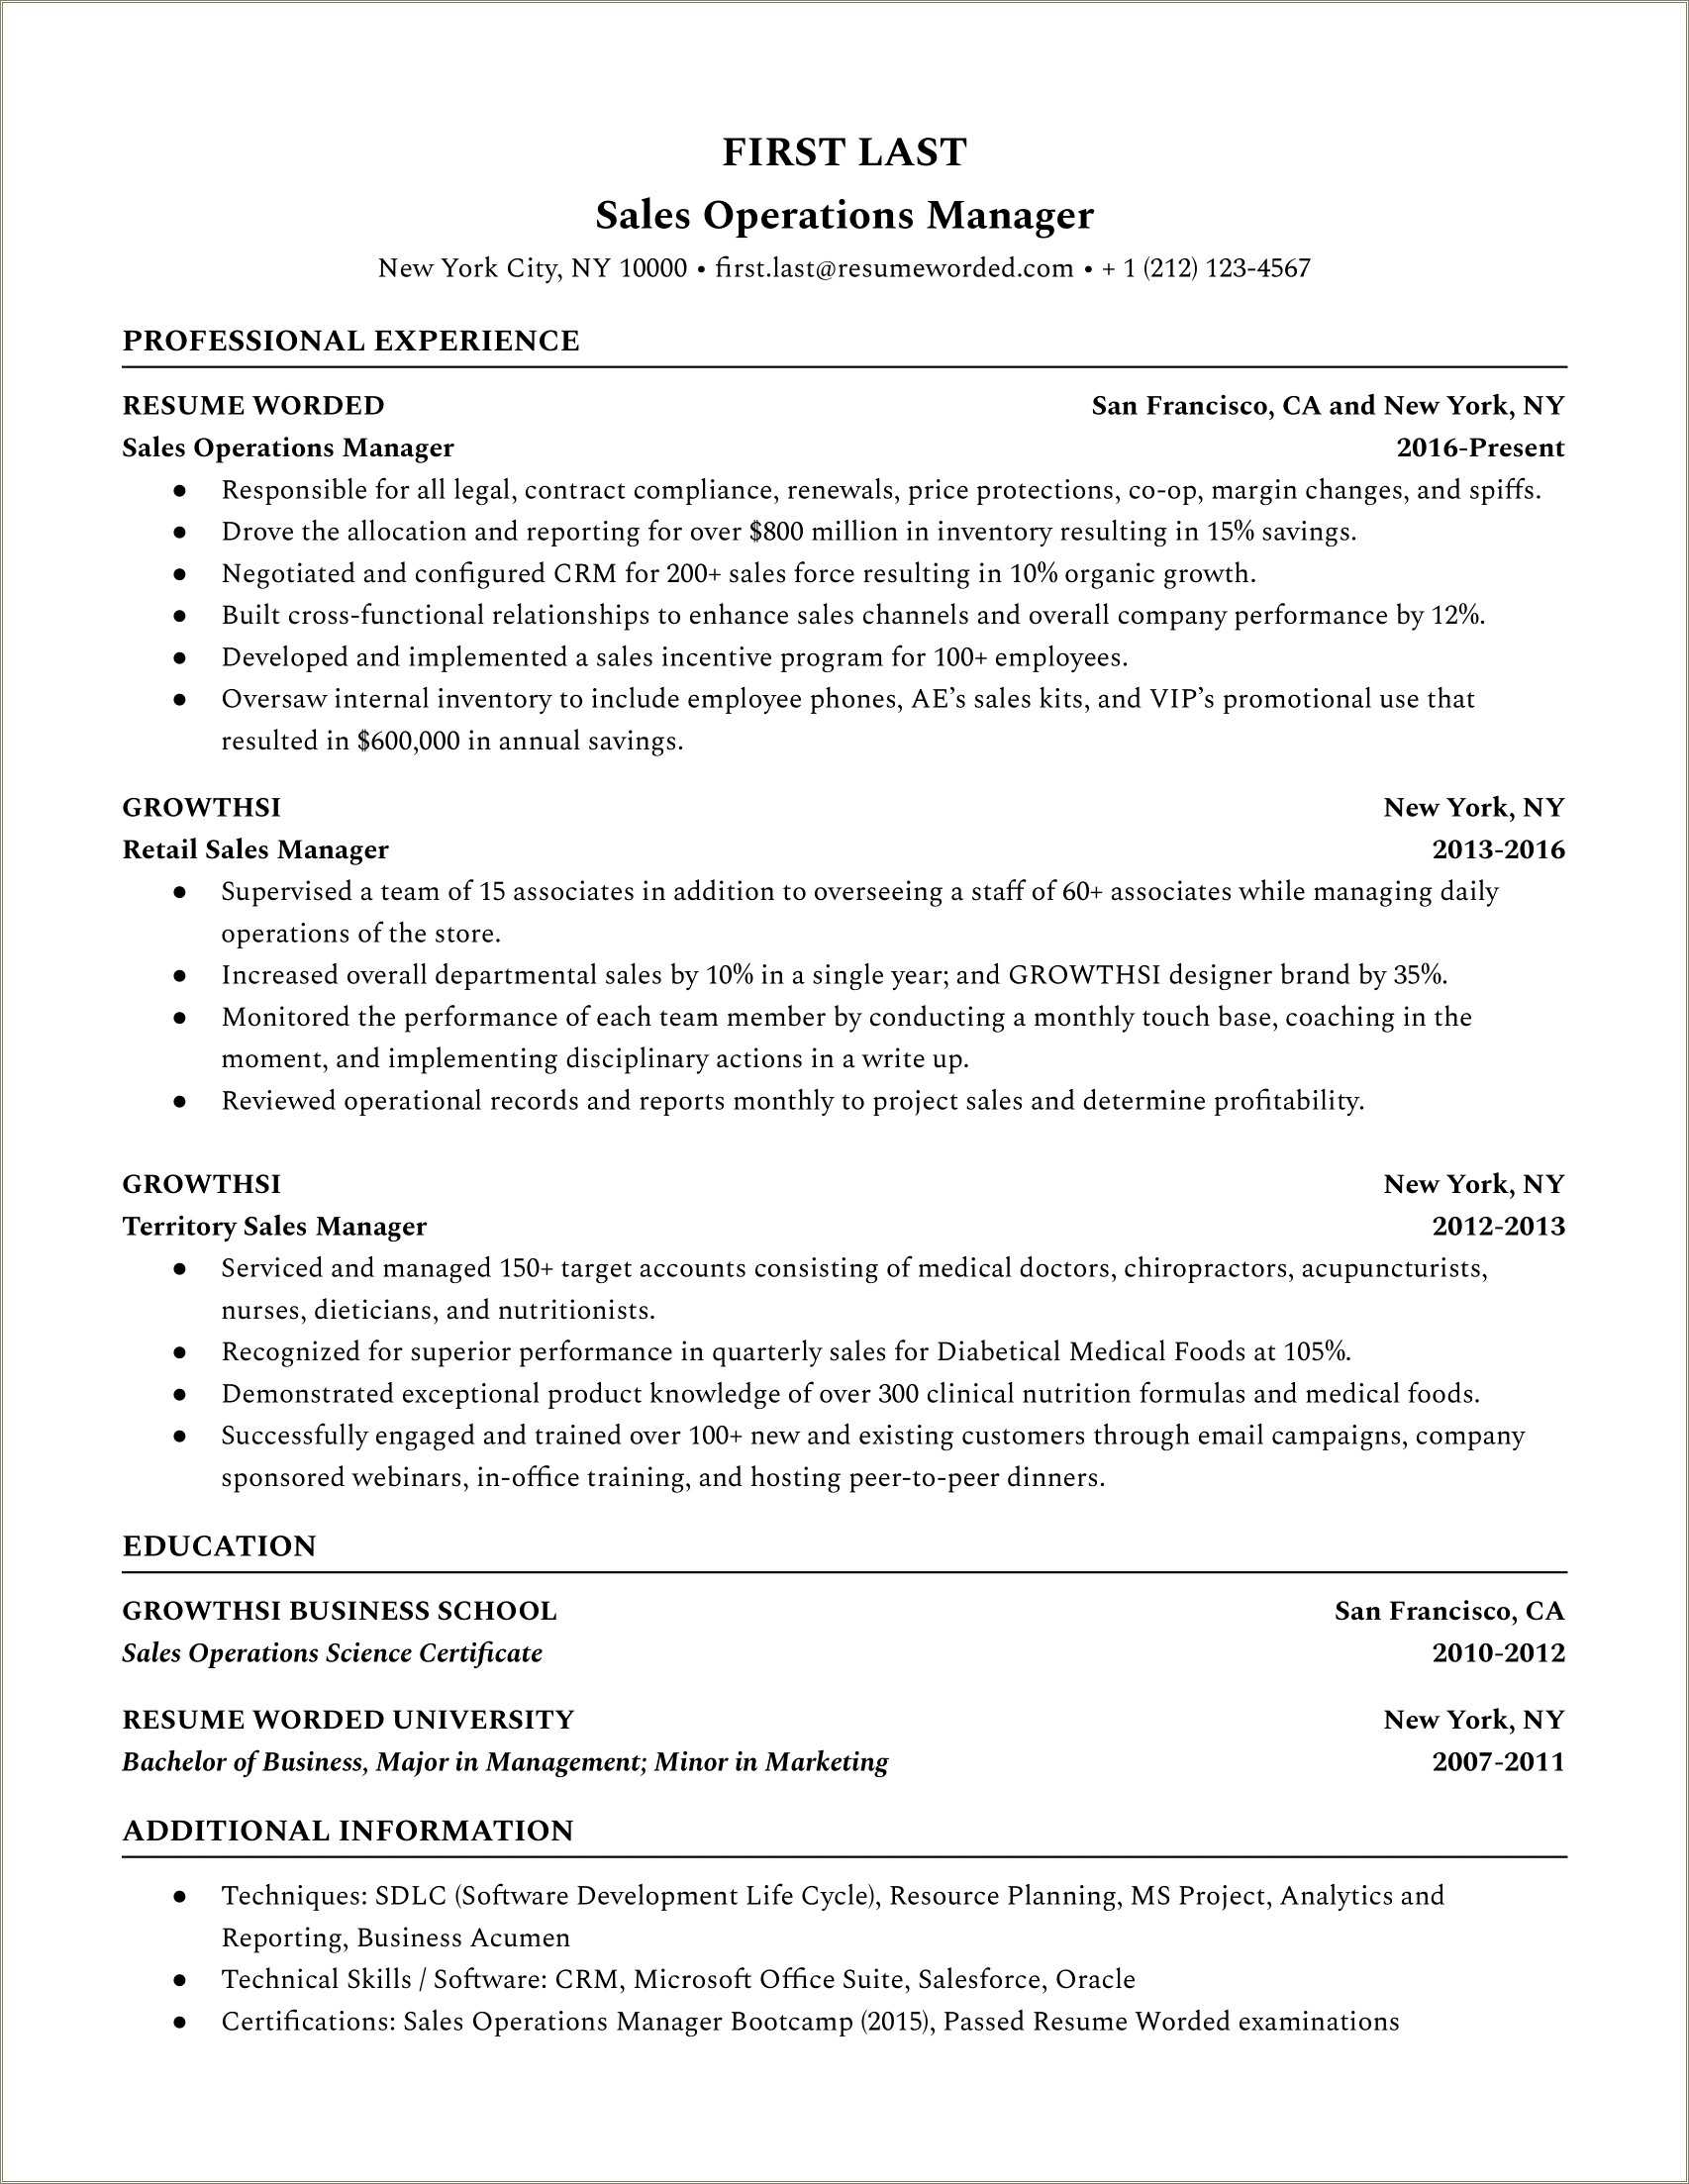 Sales Operations Manager Resume Summary